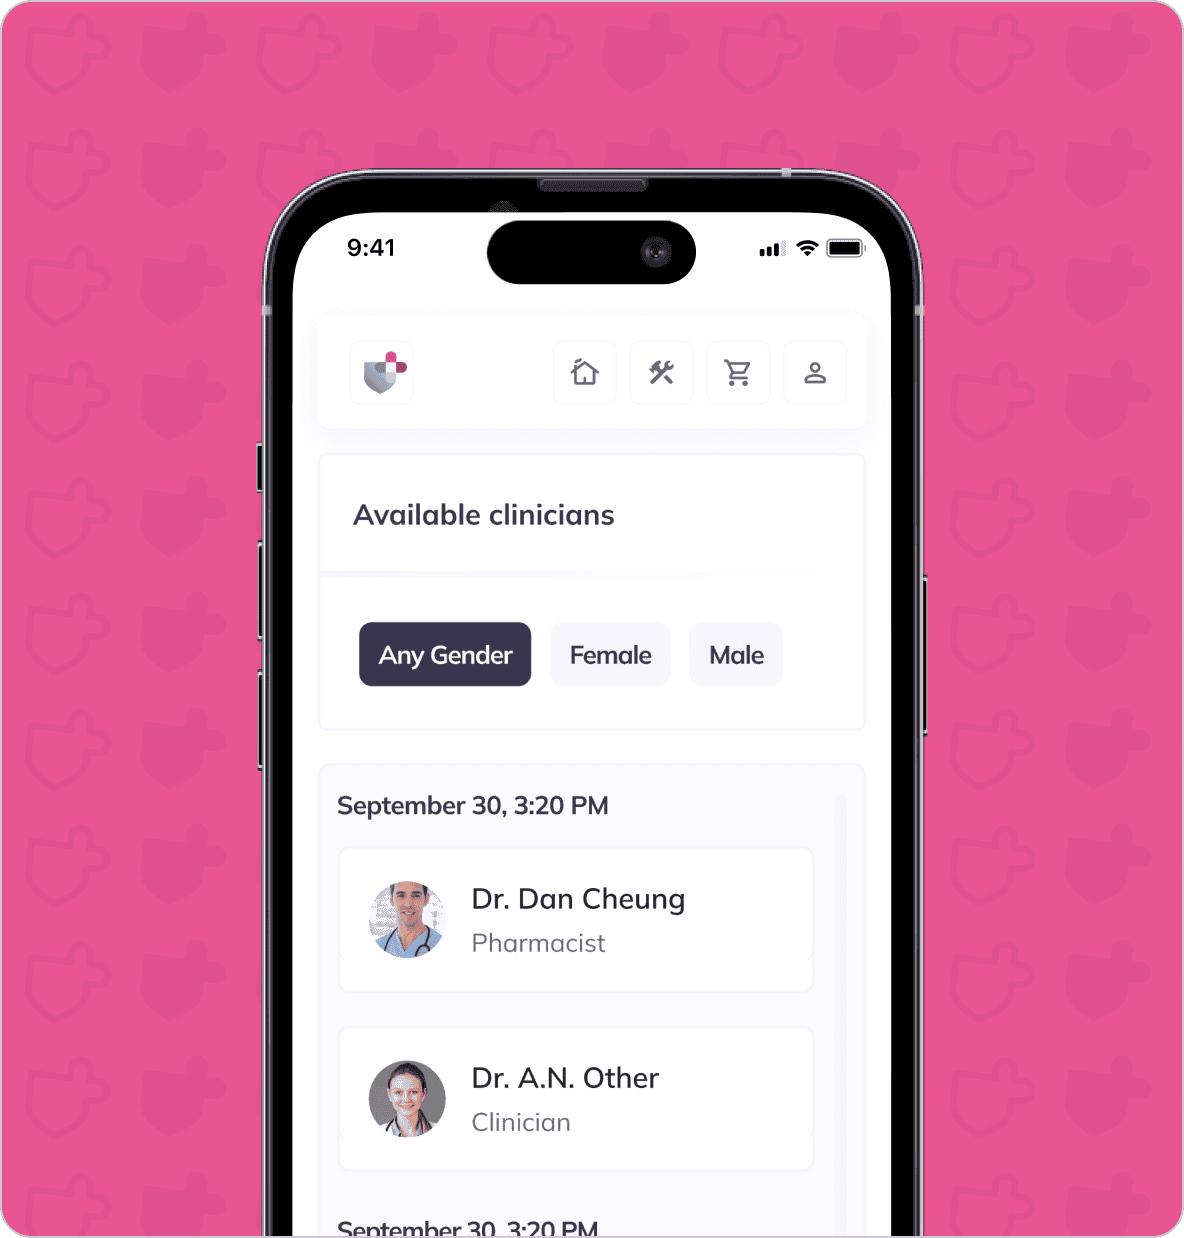 Mobile app interface showing a list of available clinicians filtered by gender. The screen lists Dr. Dan Cheung, Pharmacist, and Dr. A.N. Other, Clinician, with their respective appointment times.